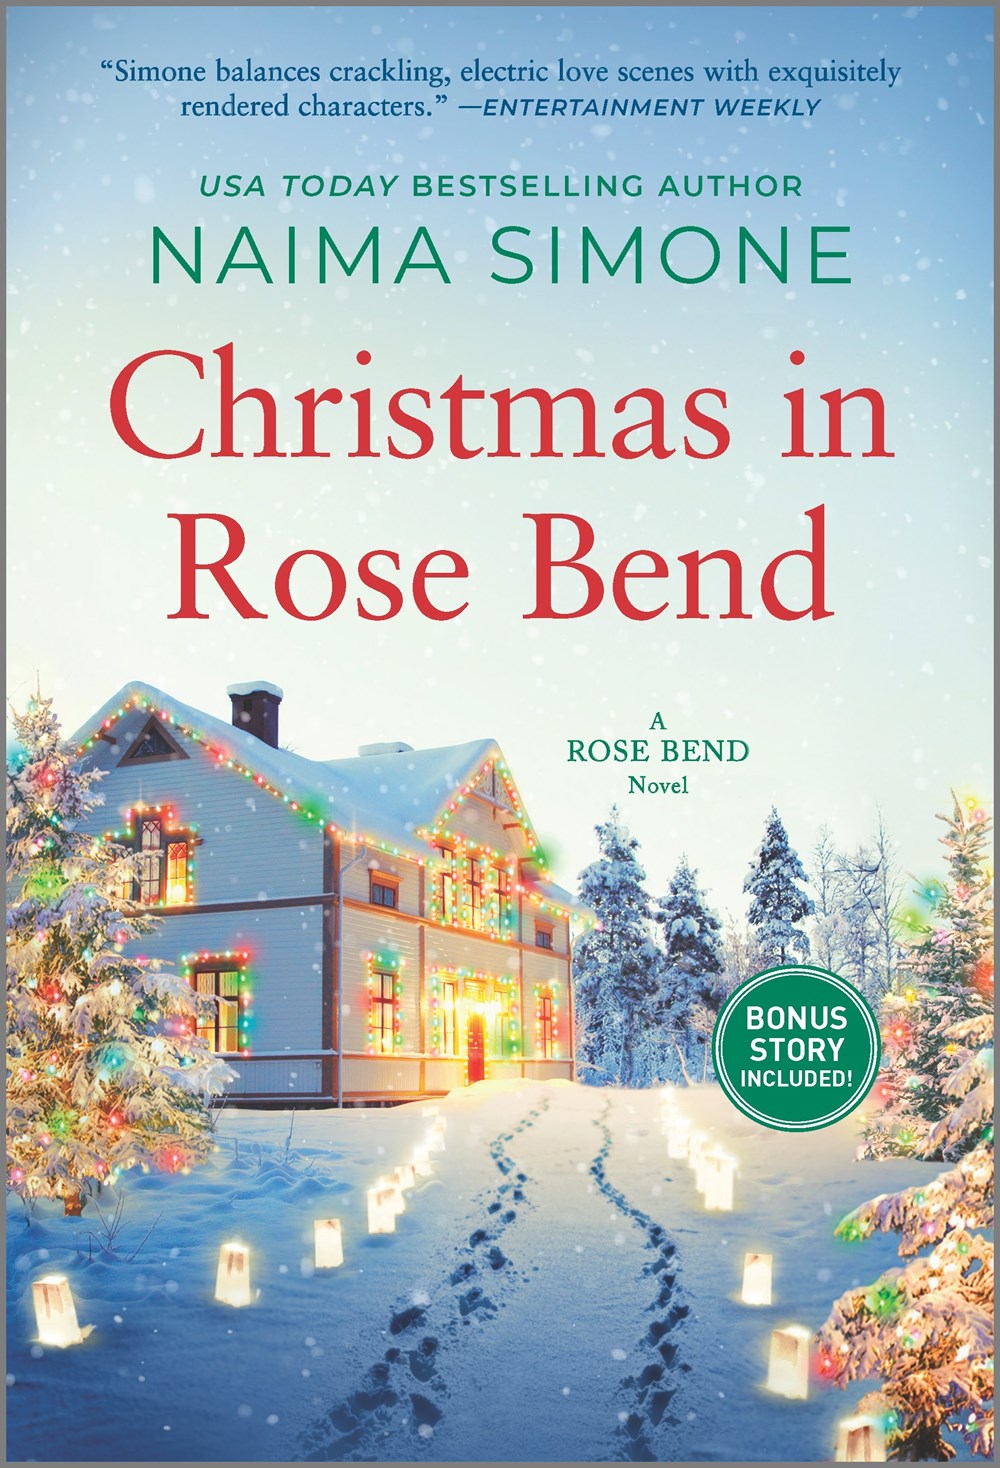 Christmas in Rose Bend: A Novel